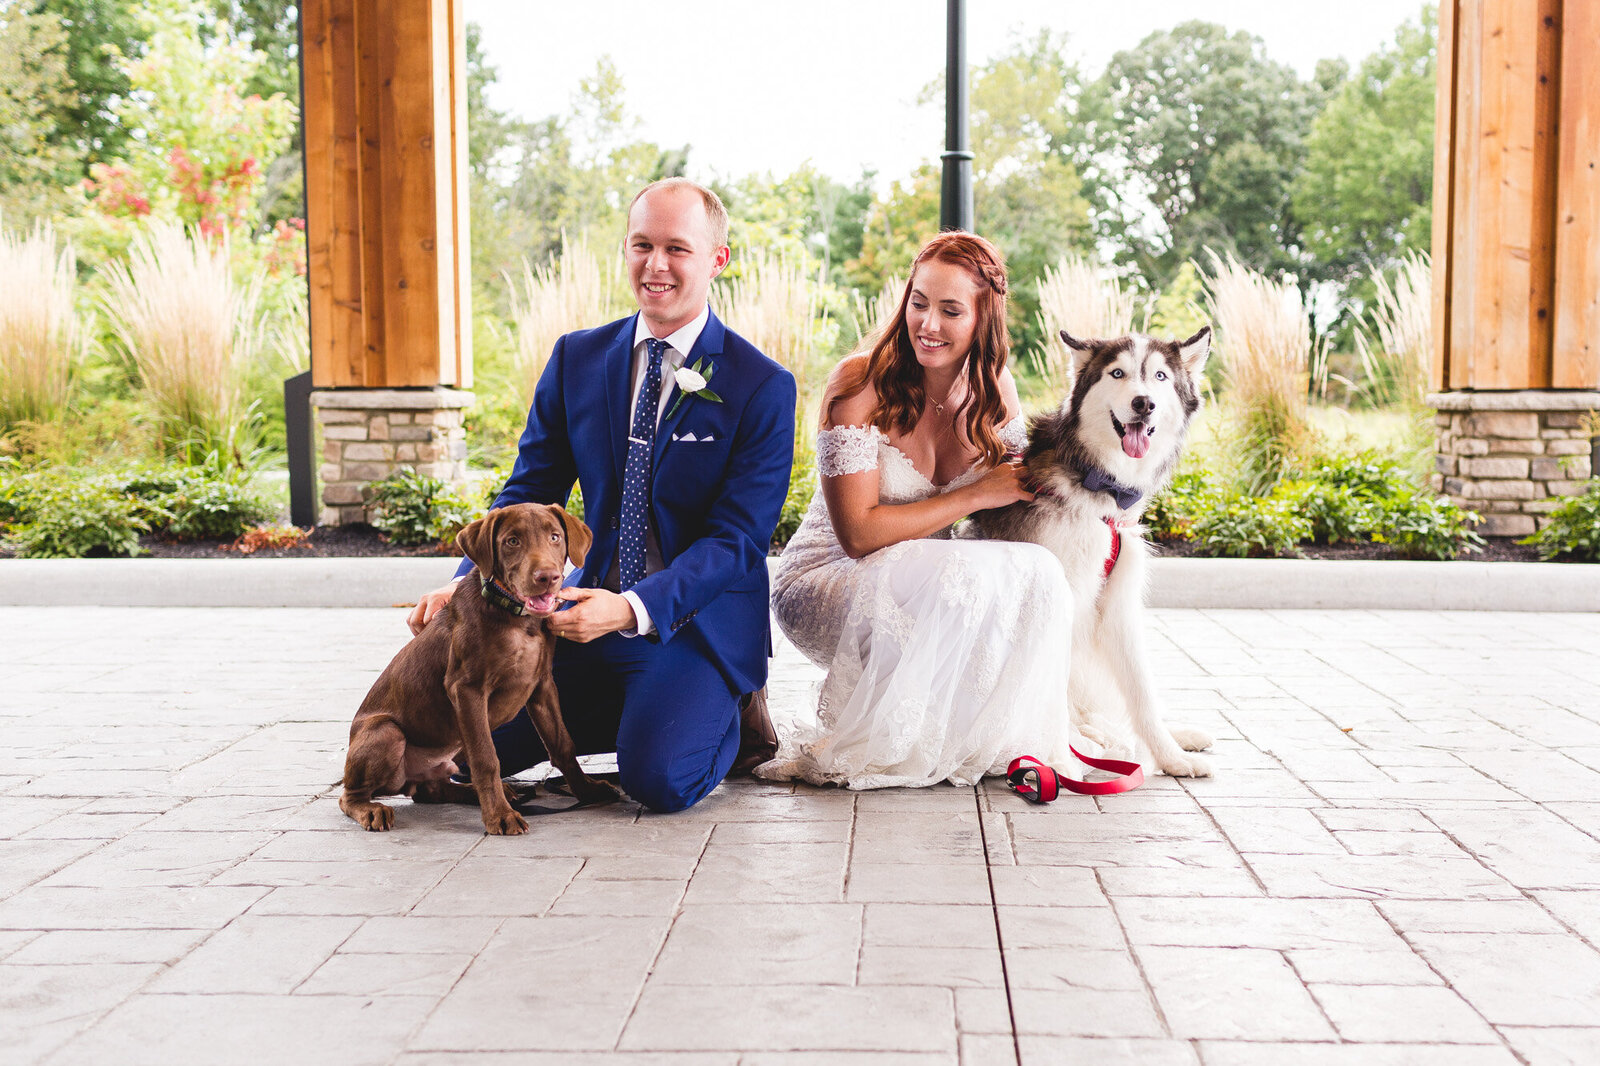 bride-groom-with-dogs-wedding-day-estates-at-new-albany-ohio